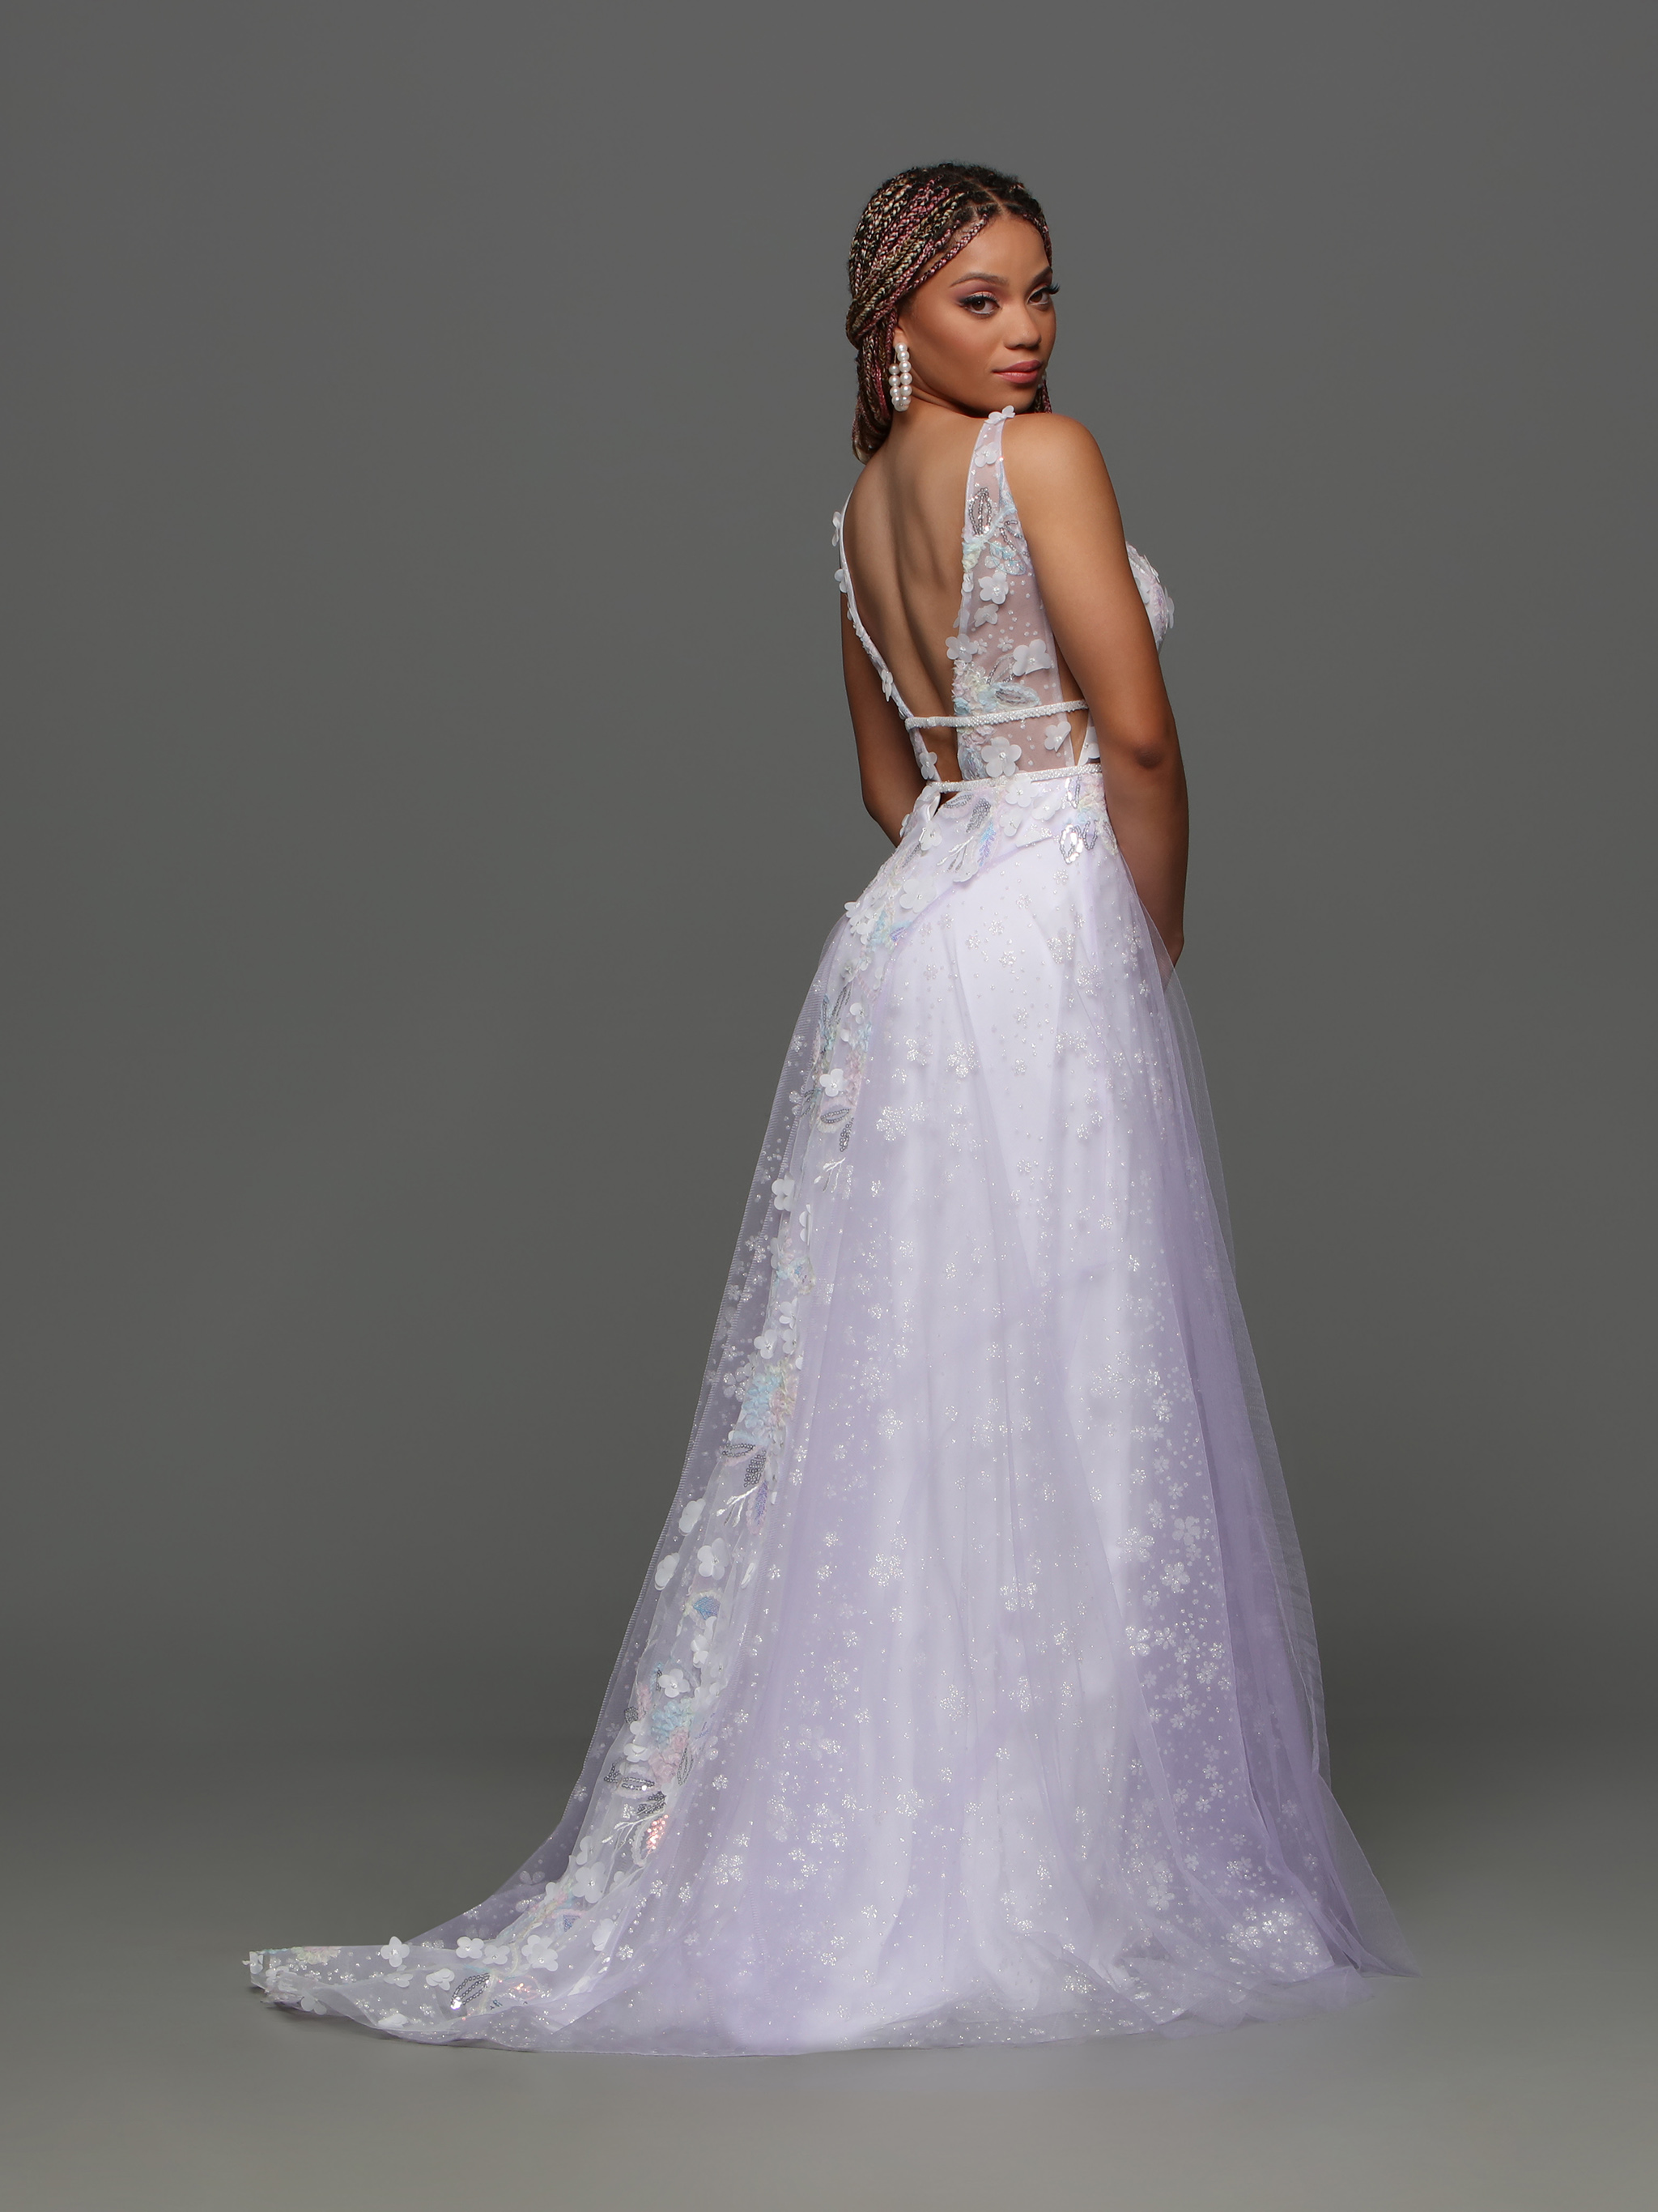 Image showing back view of style #72308